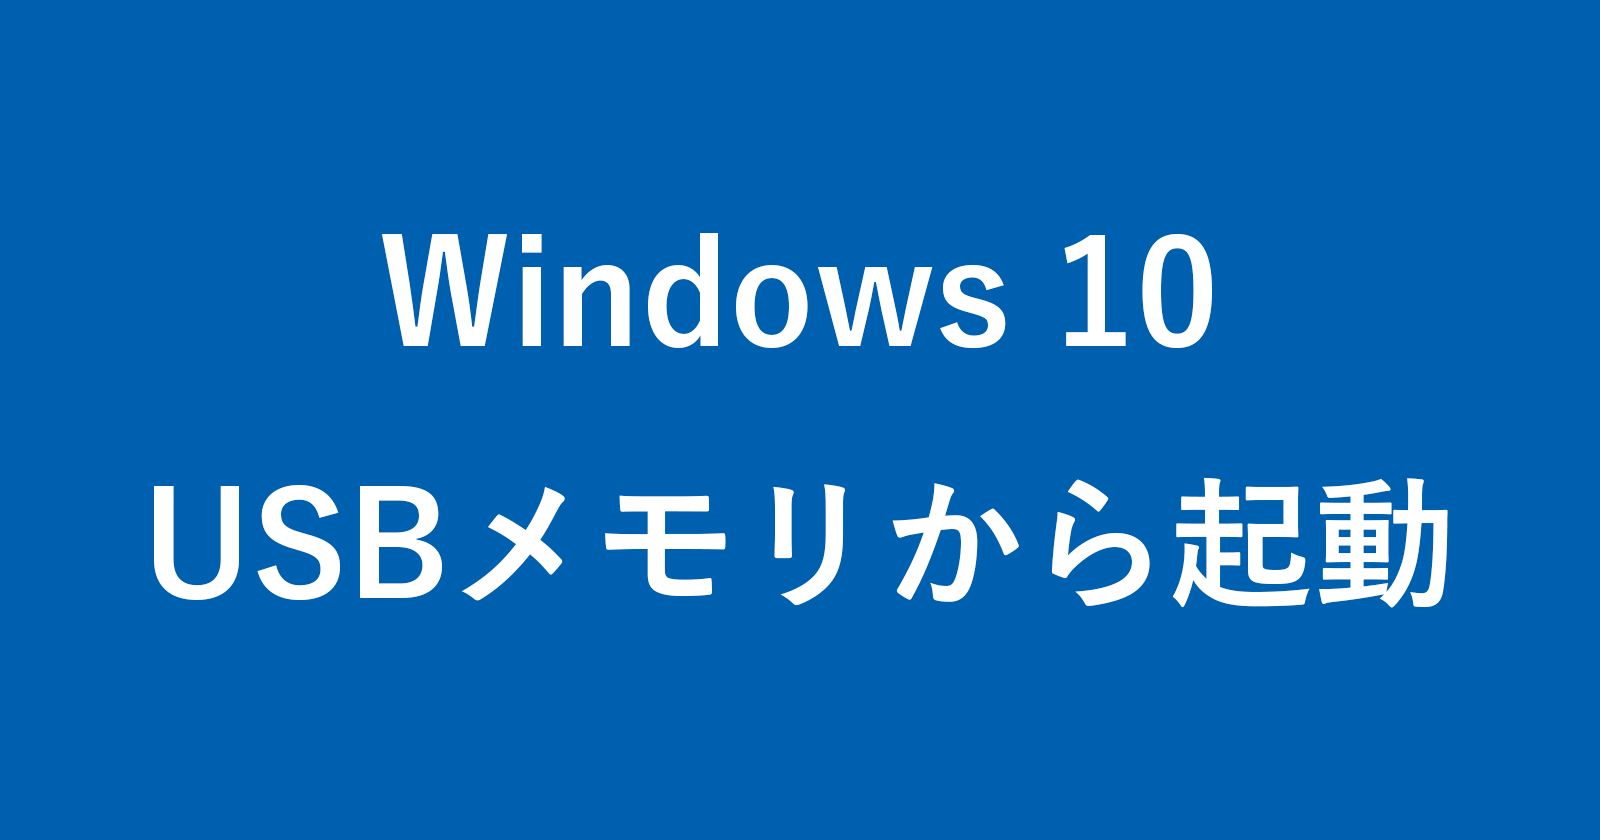 windows 10 boot from usb drive